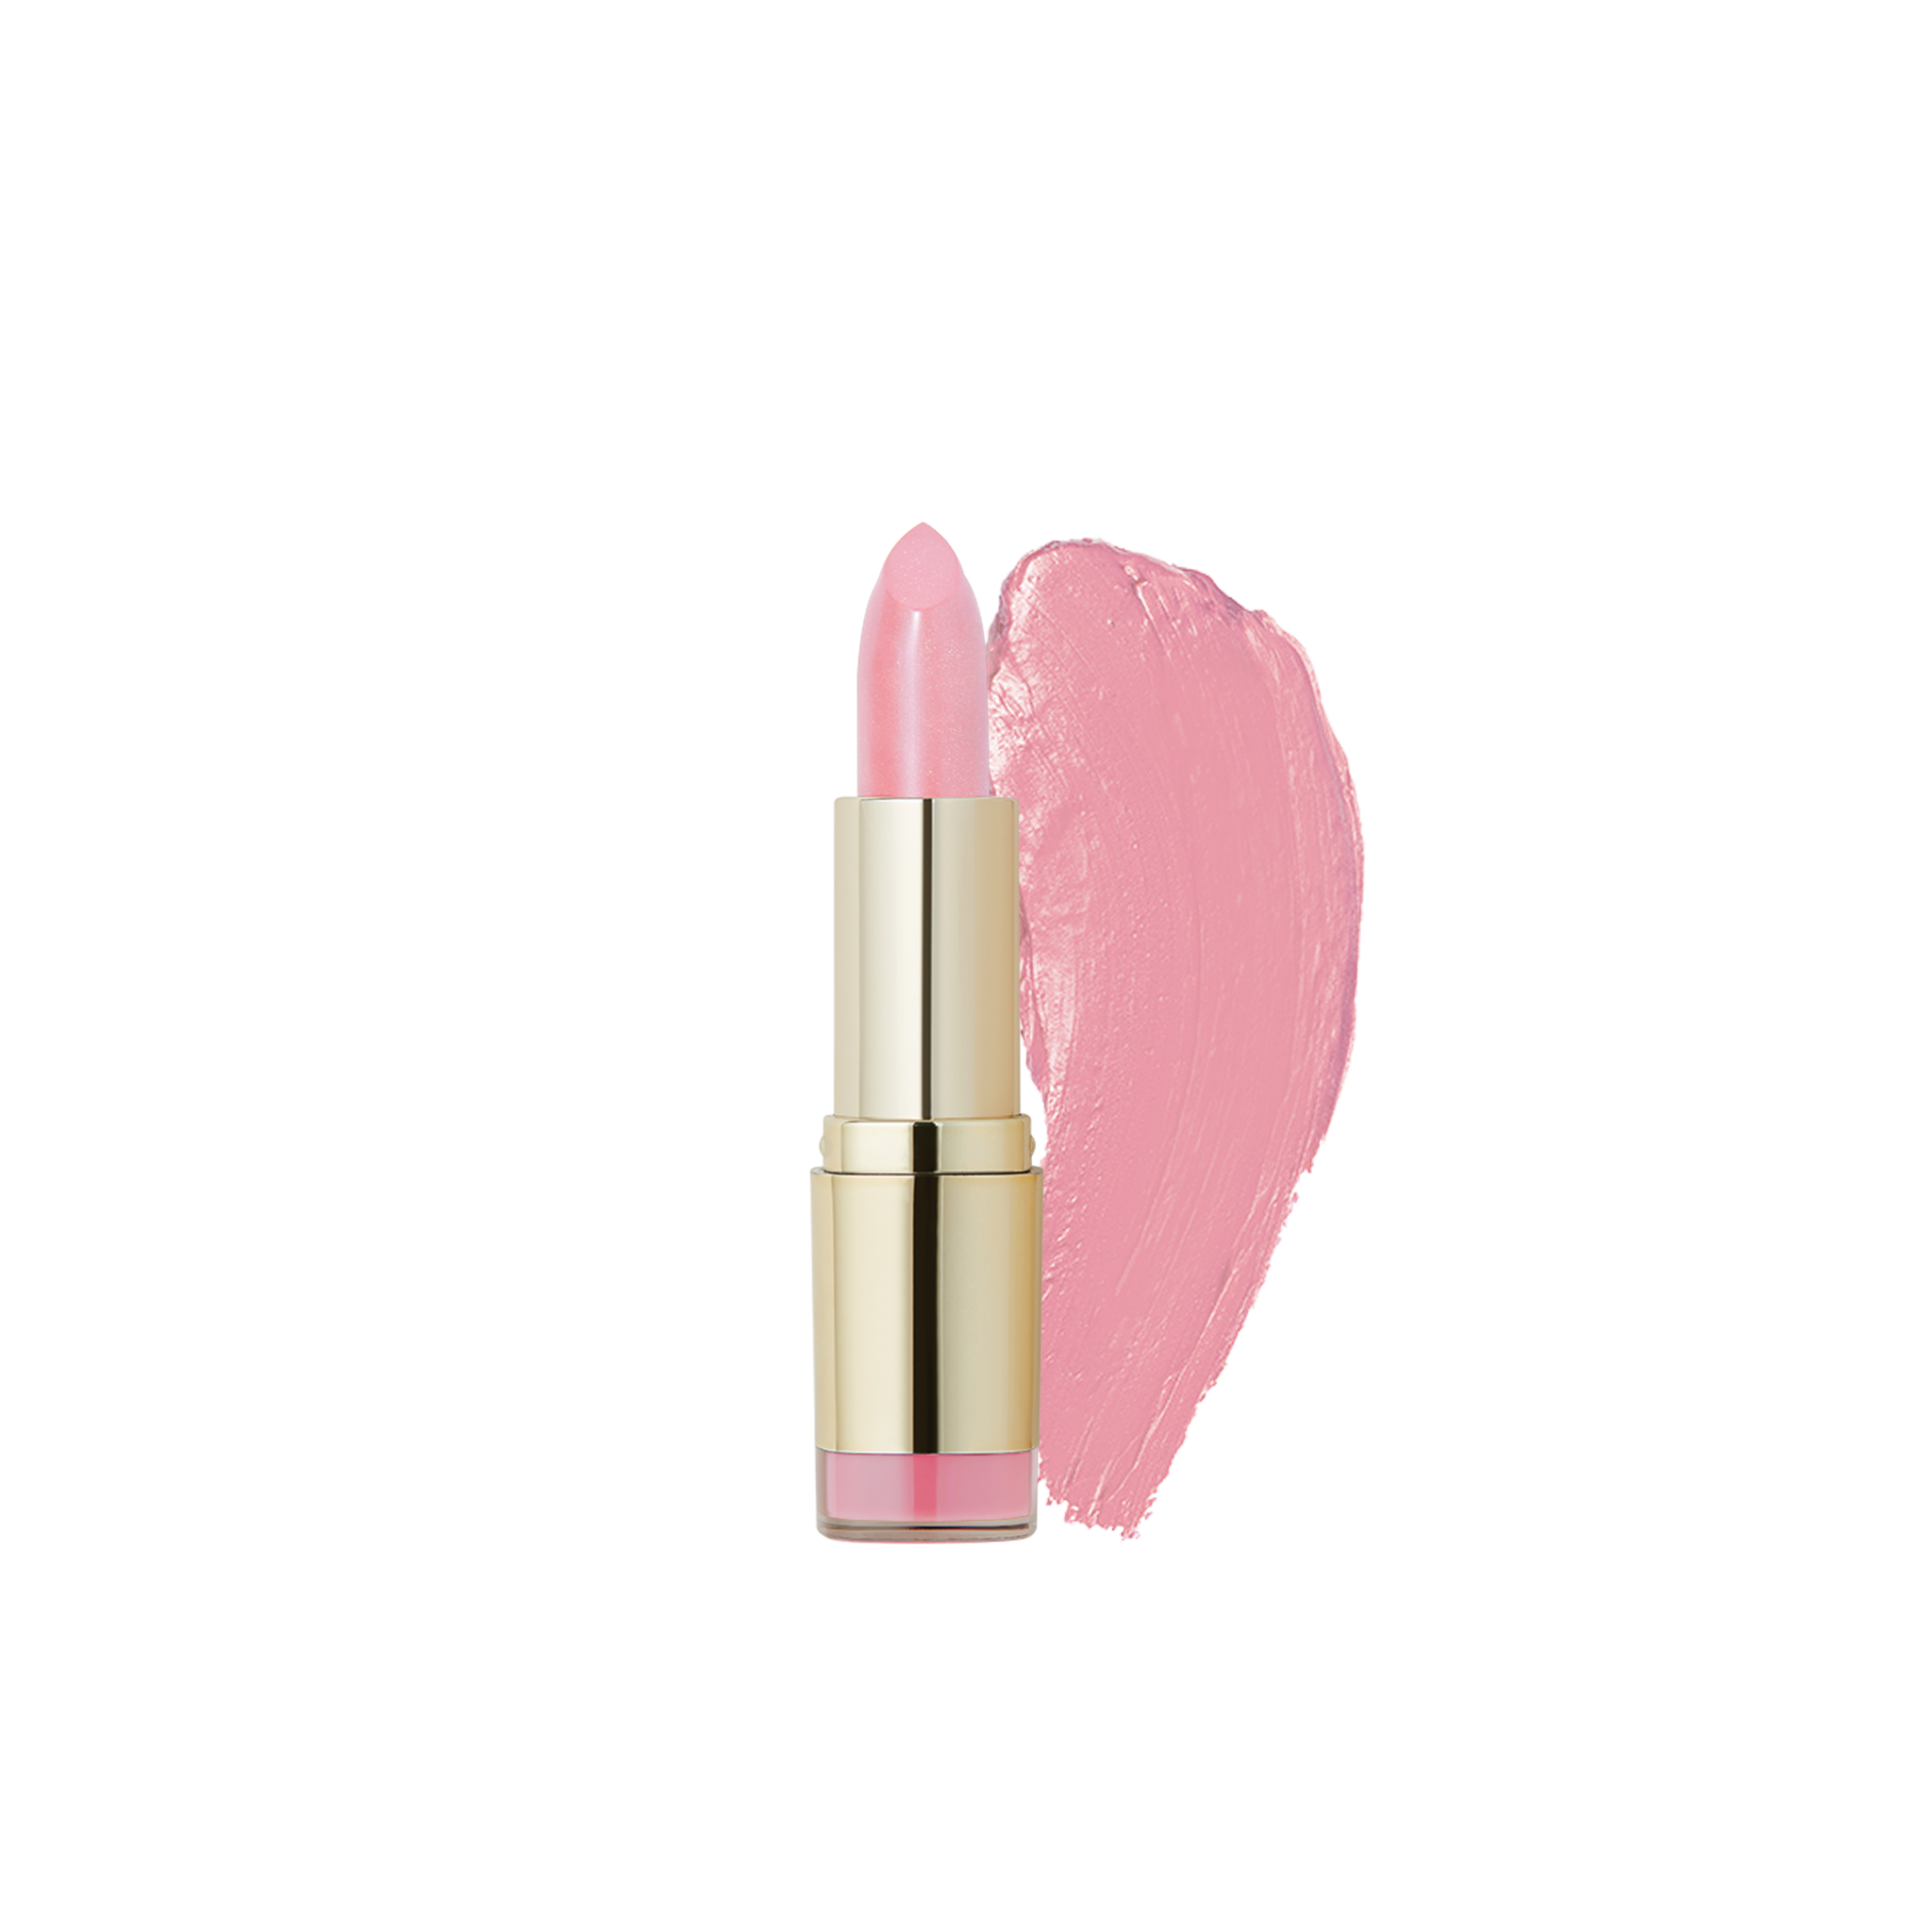 Milani Color Statement Lipstick -Pink Frost, Cruelty-Free Nourishing Lip Stick in Vibrant Shades, Pink Lipstick, 0.14 Ounce